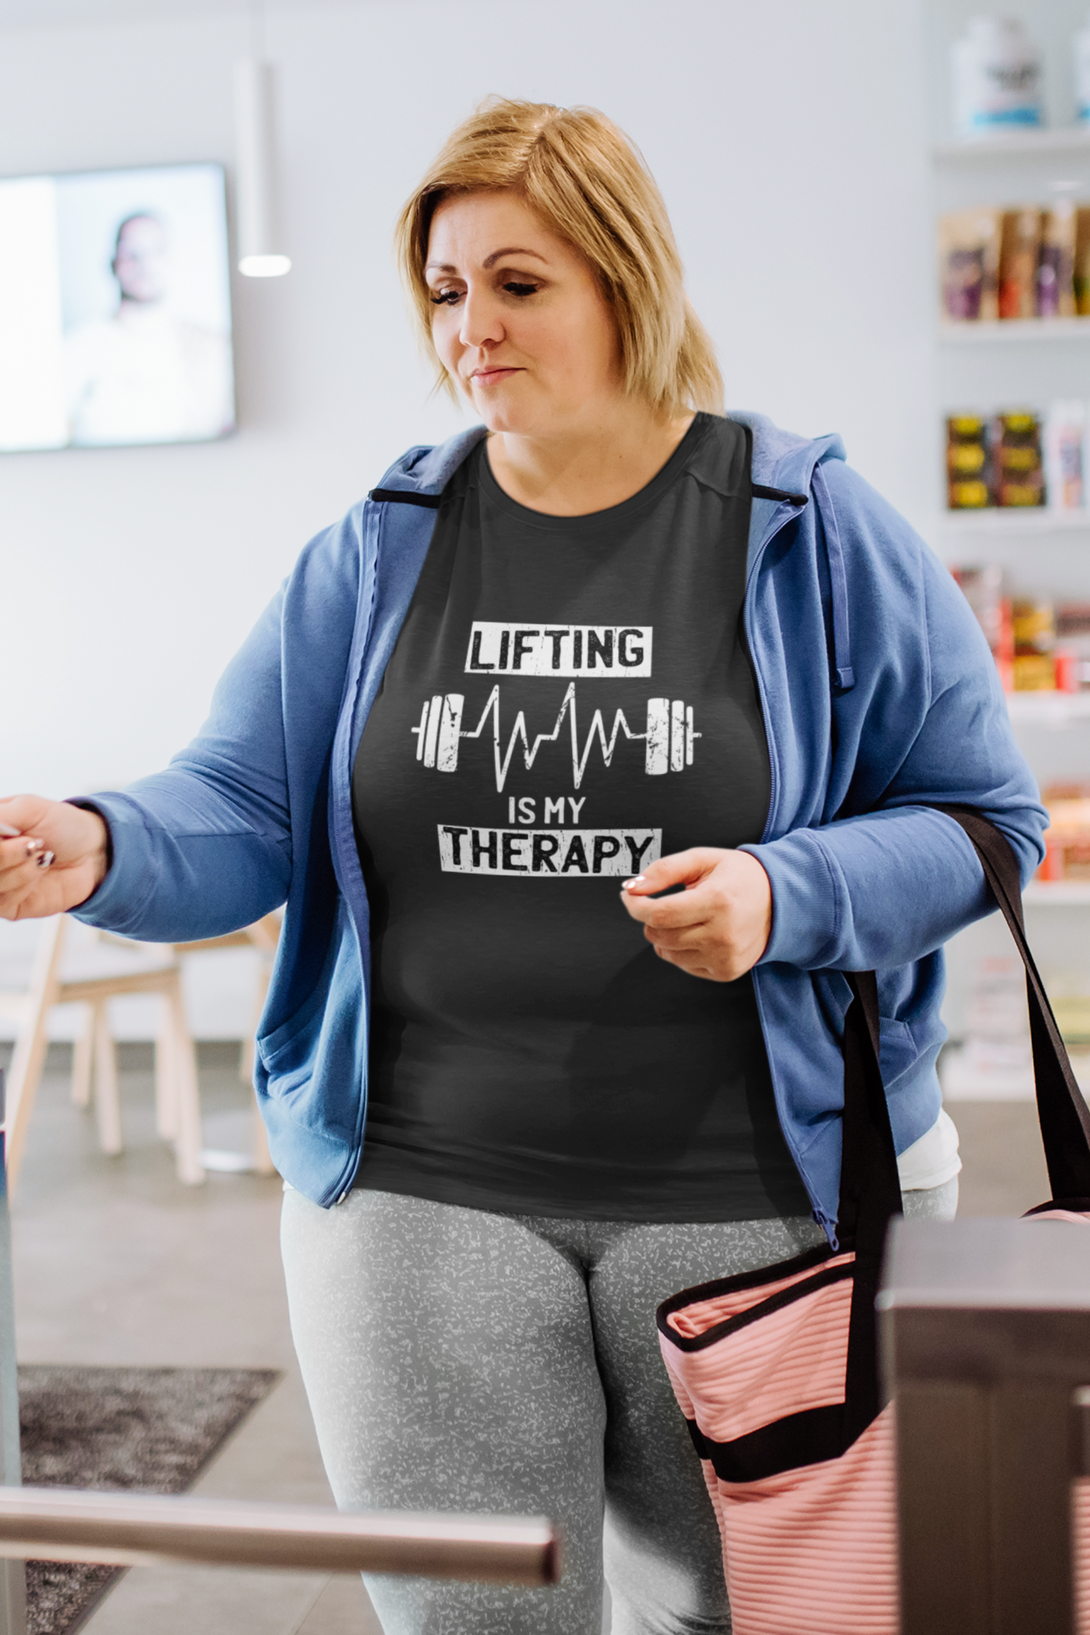 Lifting Is My Therapy Printed T-Shirt For Women - WowWaves - 4